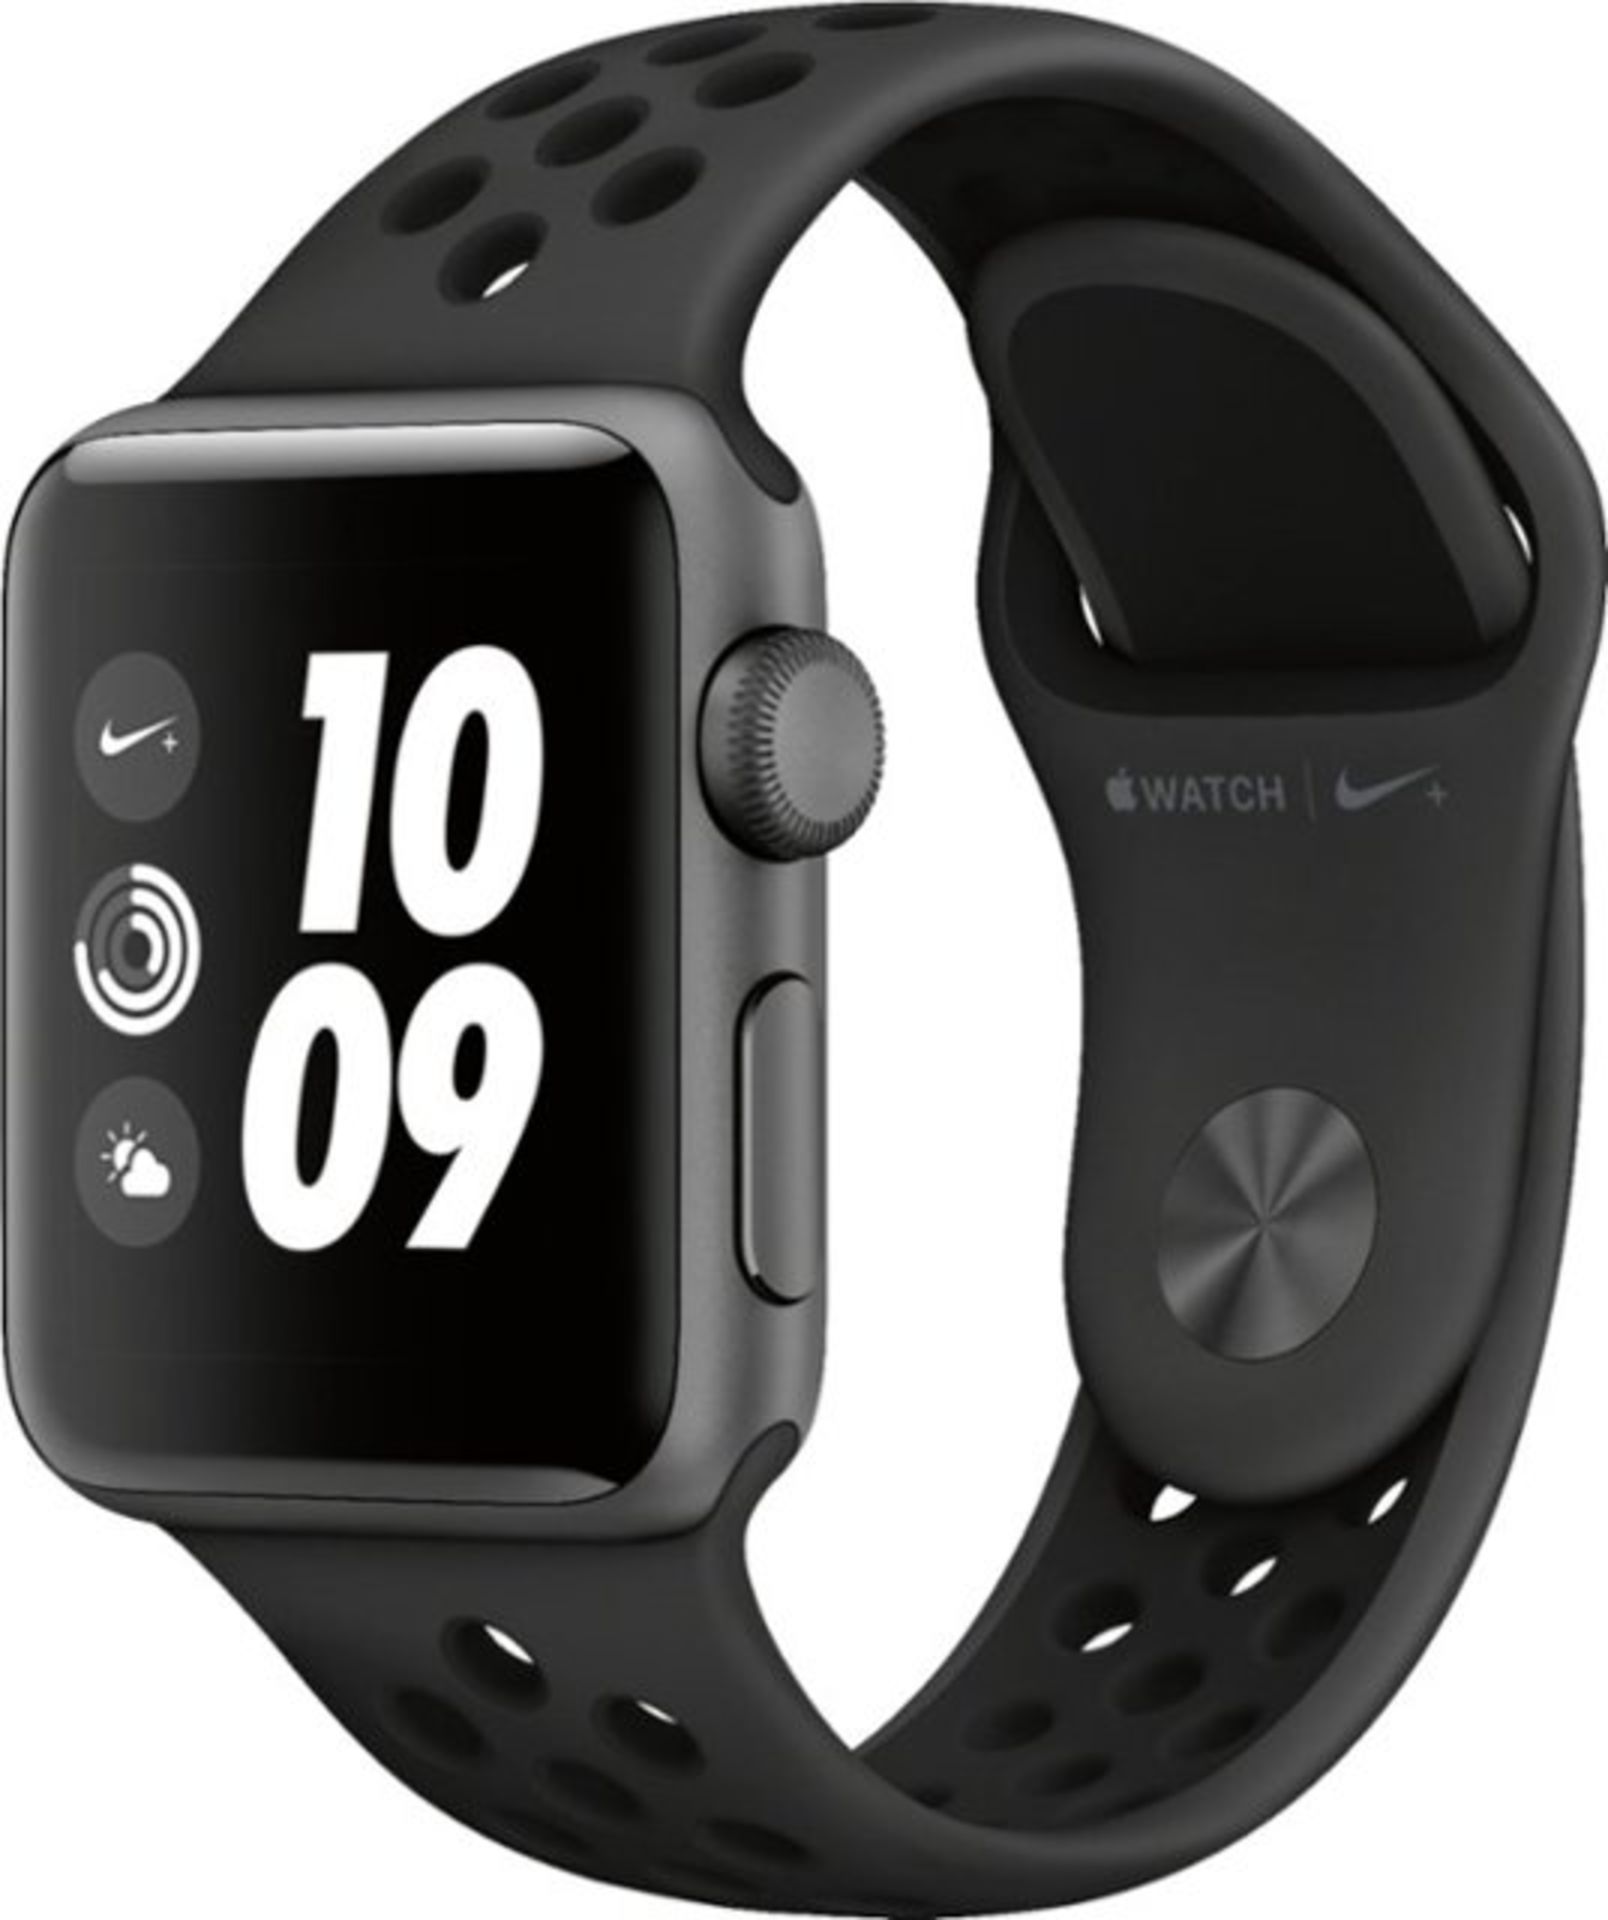 V Grade A Apple Watch Series 3 Space Grey 38mm Nike Edition + Cellular (Includes Genuine Strap & USB